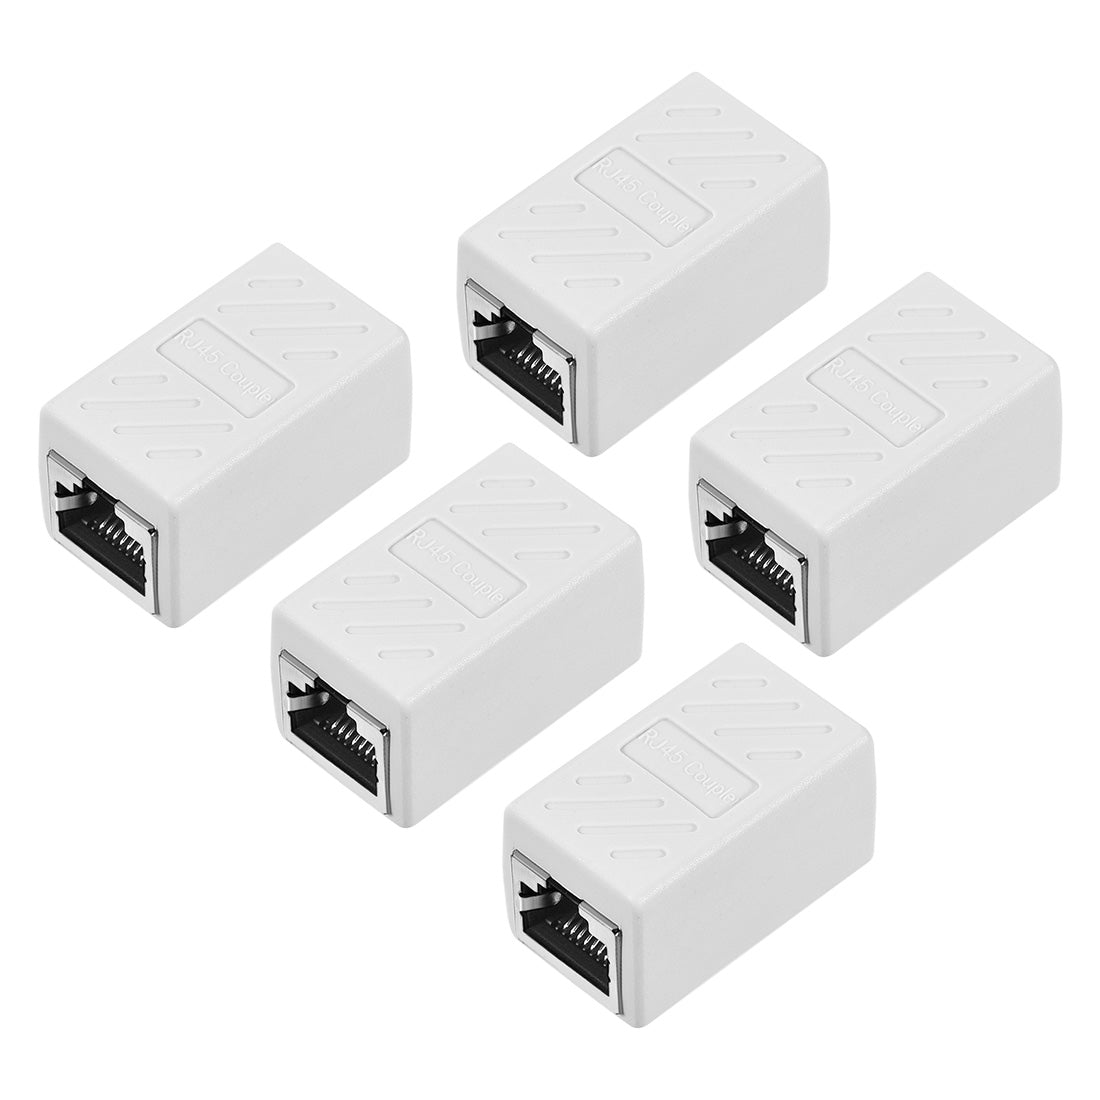 uxcell Uxcell RJ45 Coupler Inline Connector Cat7 Cat6 Cat5e Ethernet Cable Extender Adapter Female to Female 36x20x20mm White 5Pcs